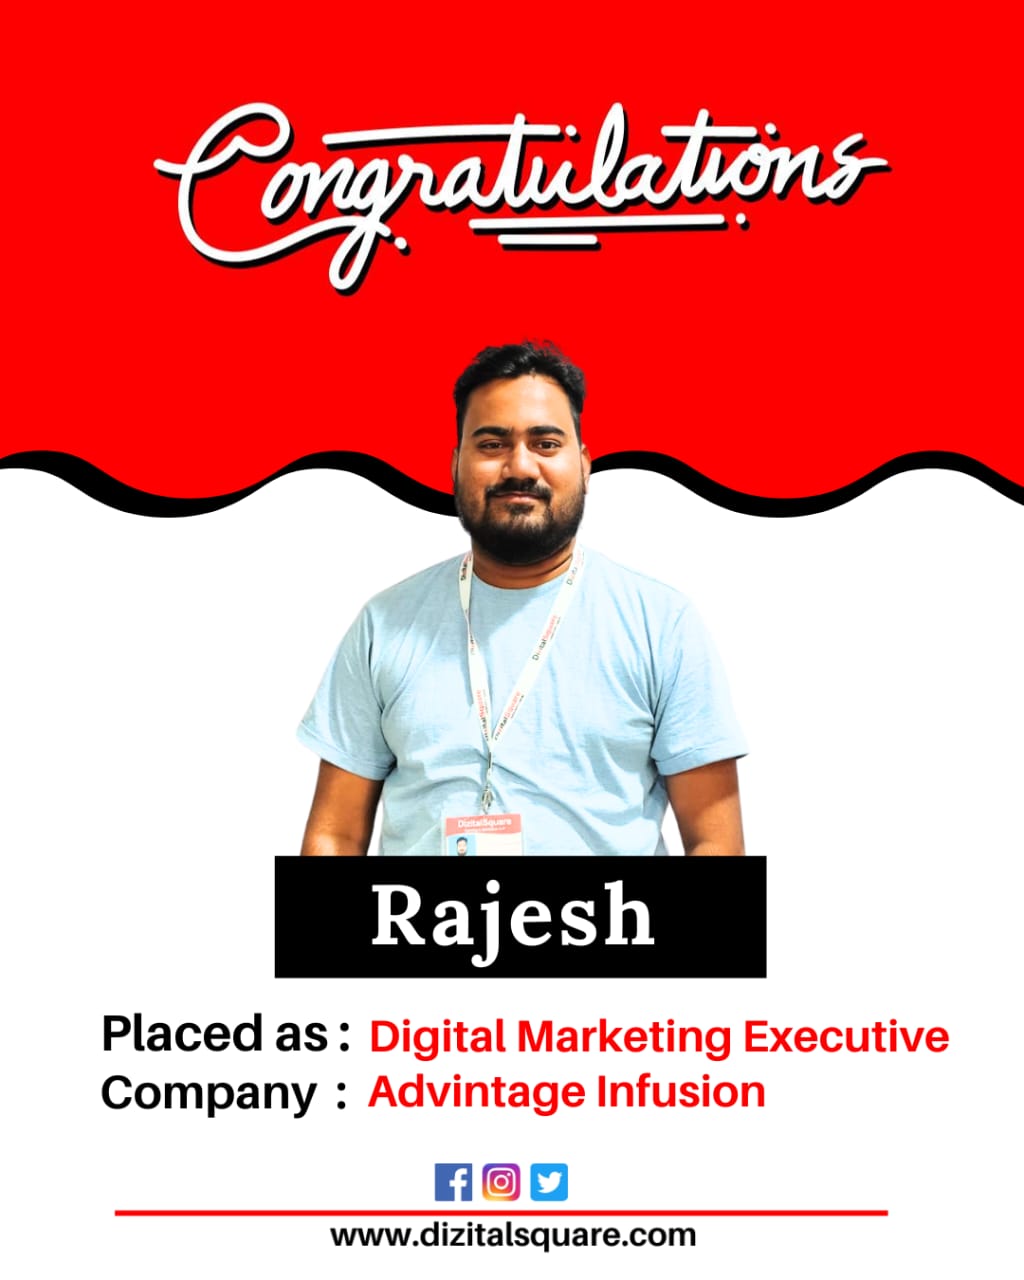 Rajesh placed after digital marketing course with dizitalsquare